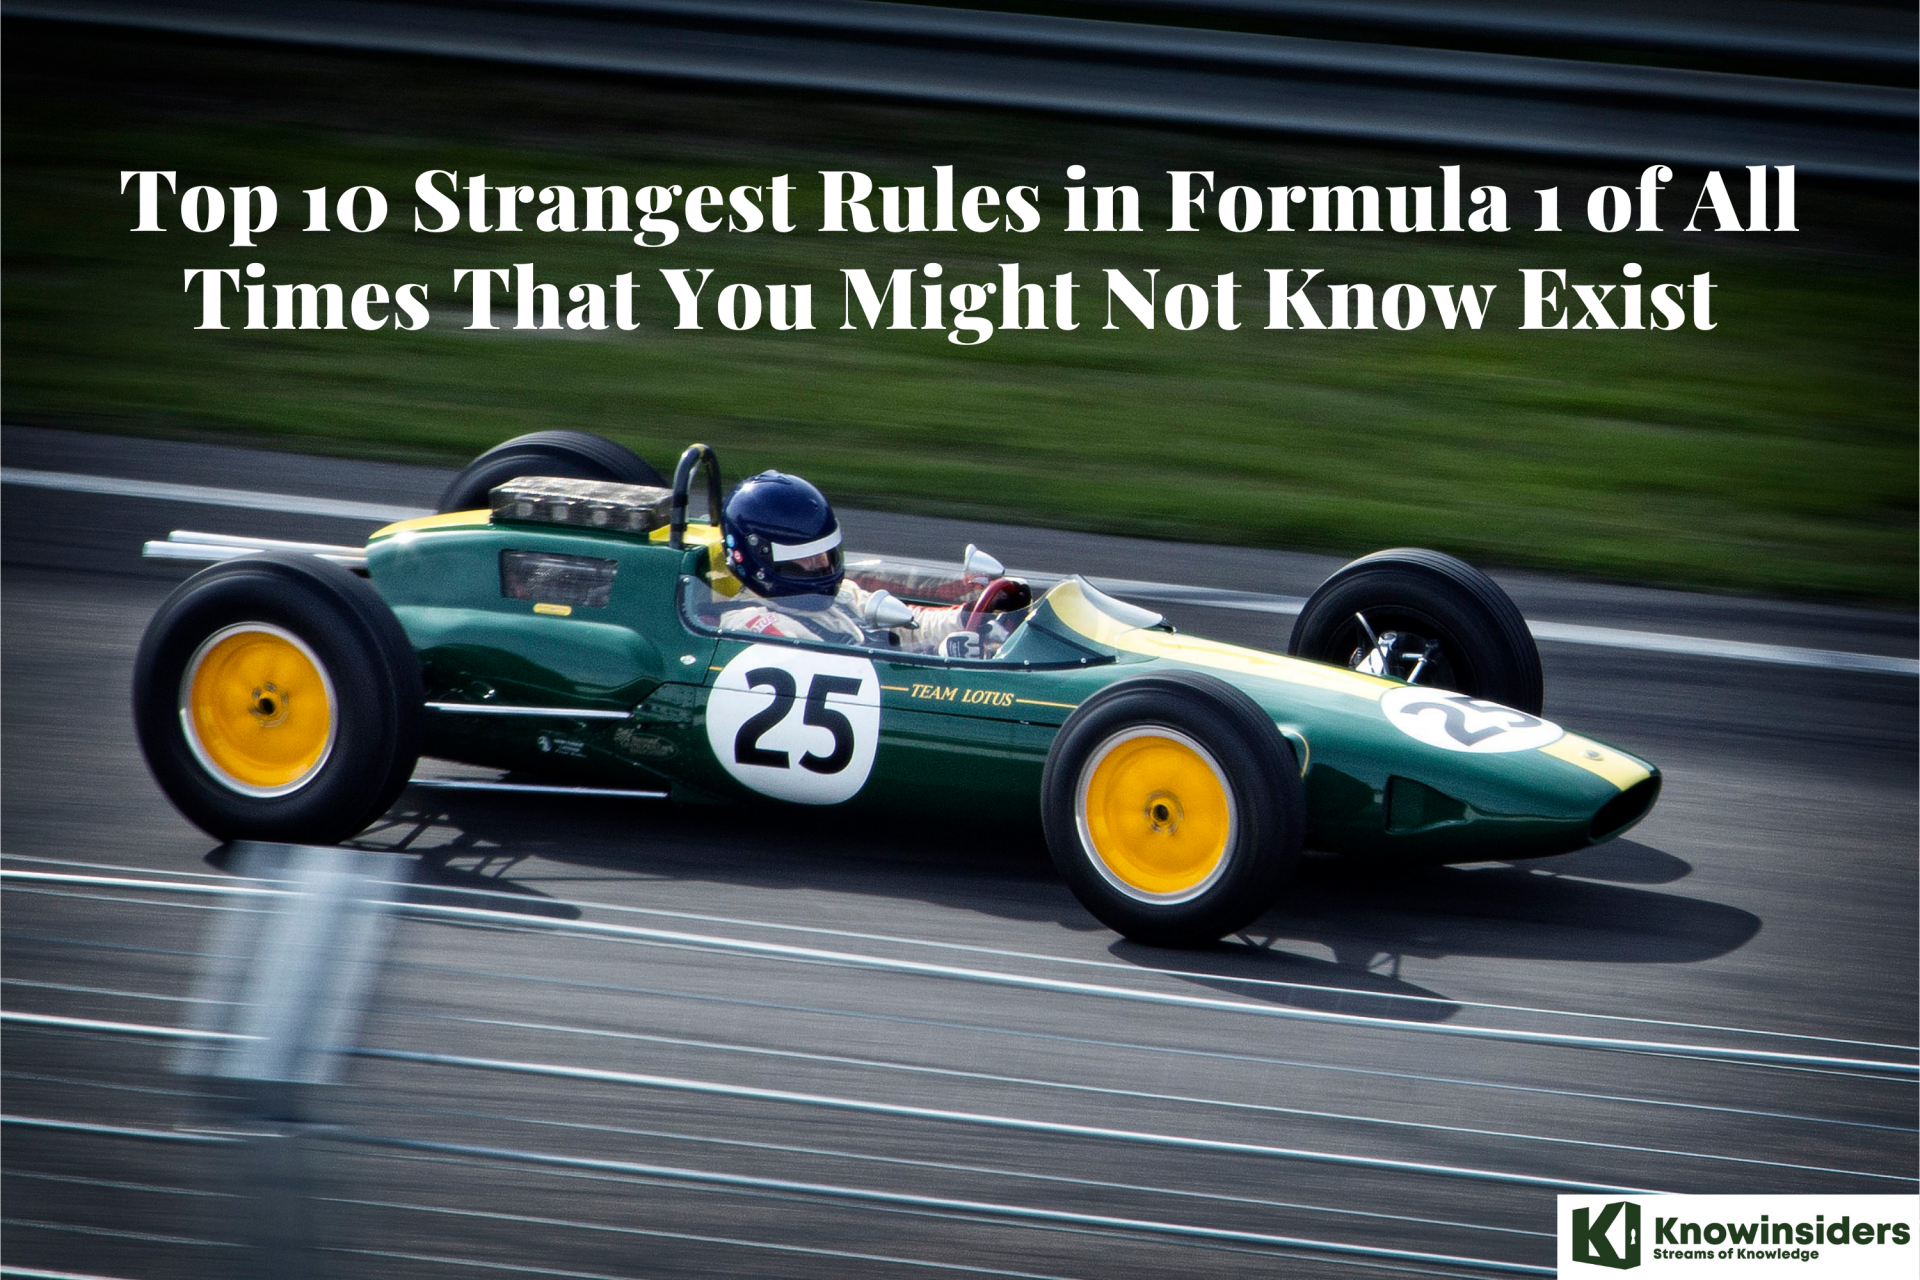 Top 10 Strangest Rules in Formula 1 of All Times That You Might Not Know Exist